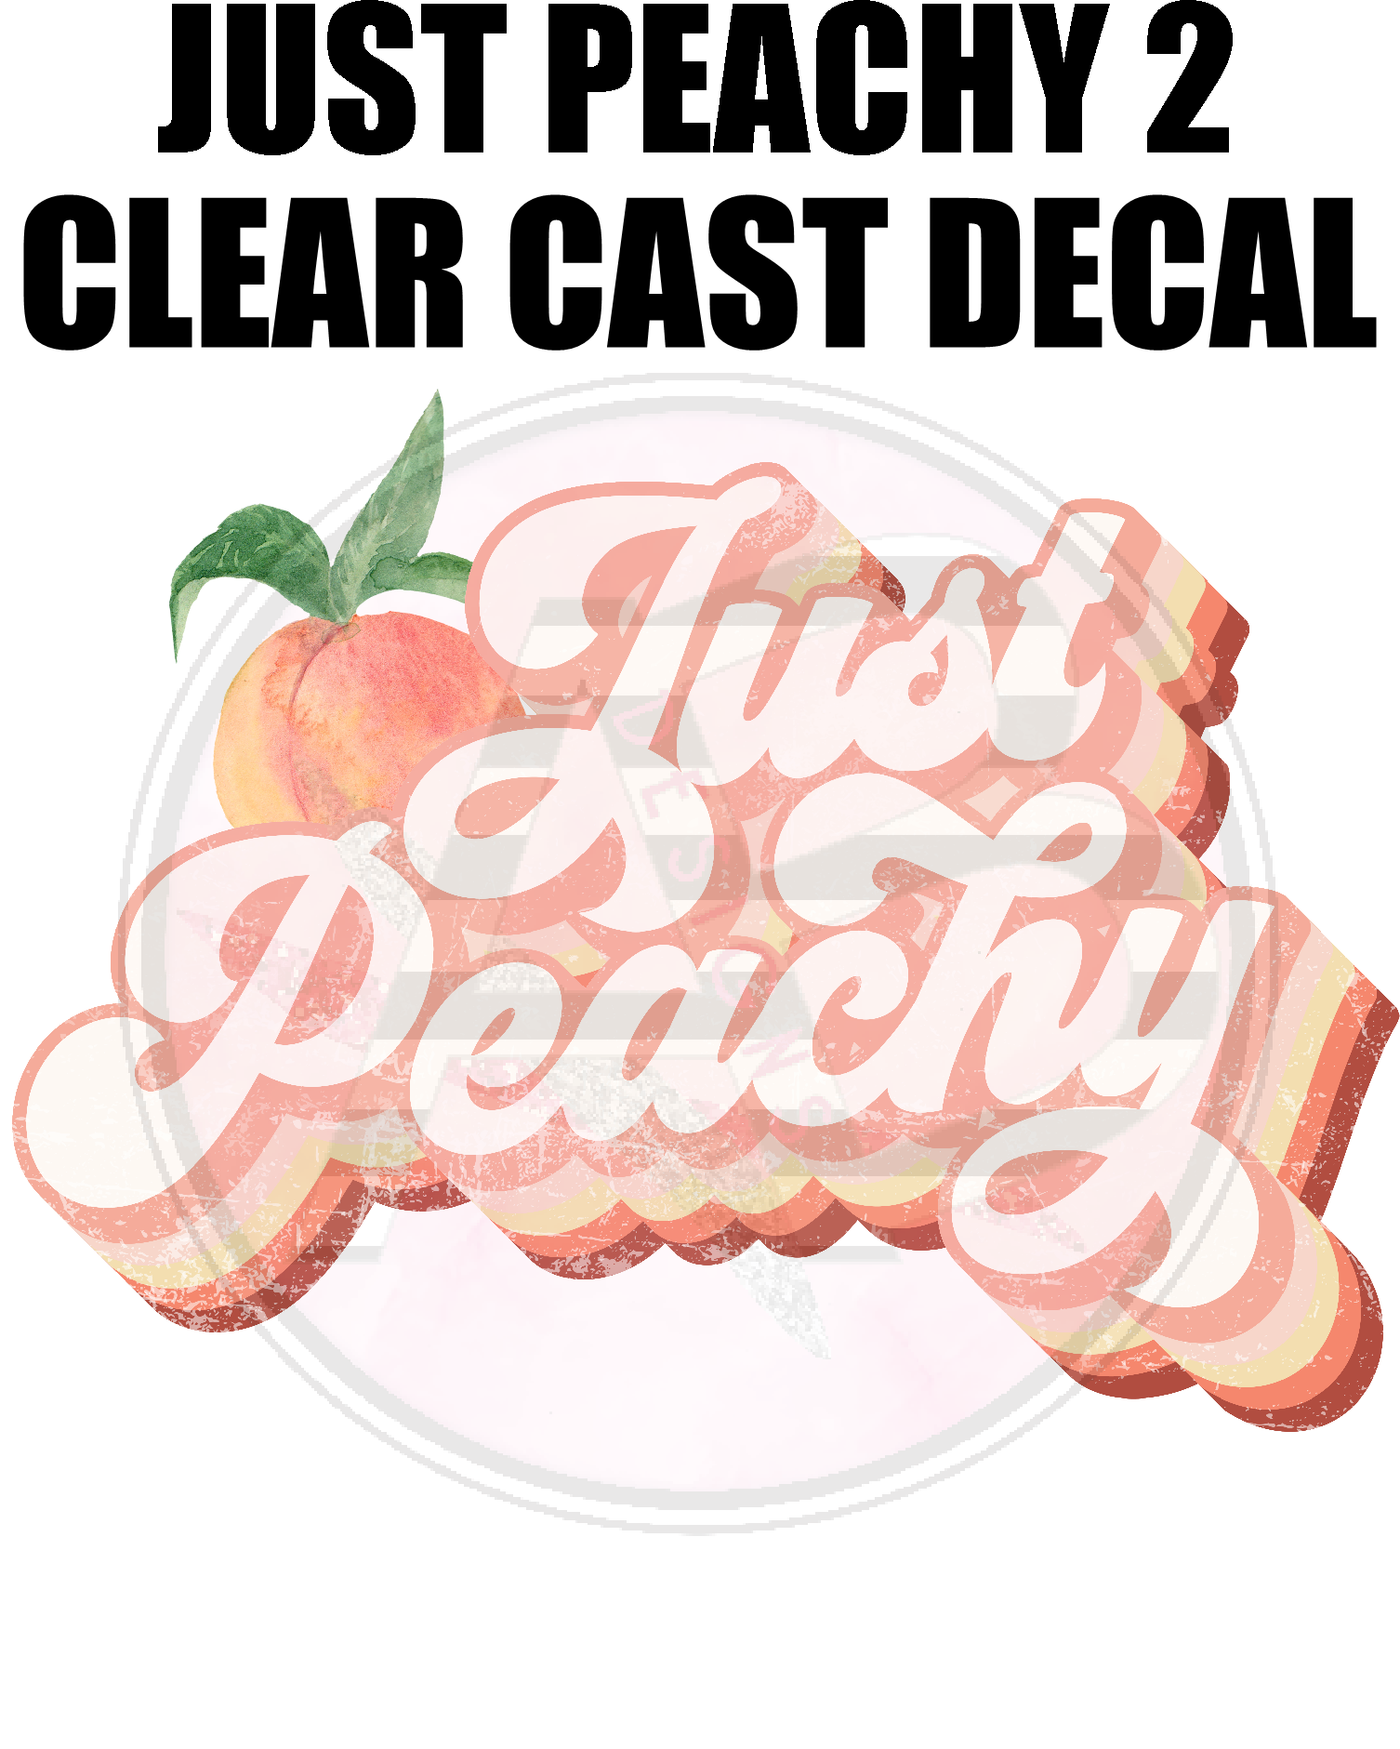 Just Peachy 2- Clear Cast Decal